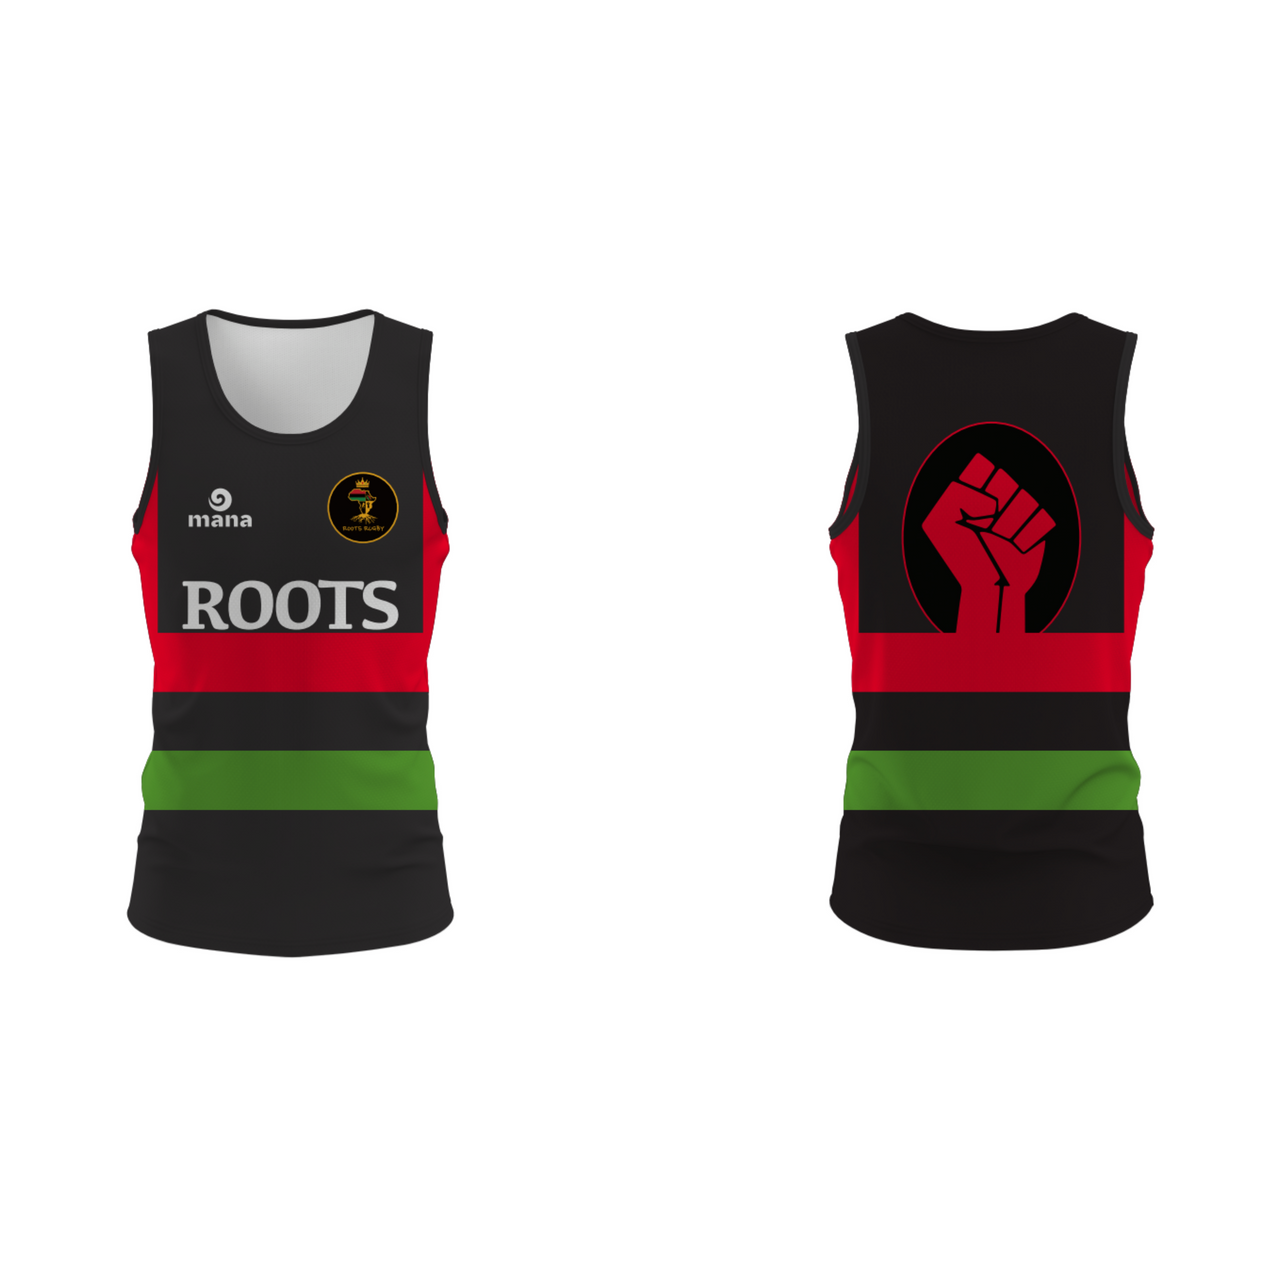 ROOTS Rugby Tank Top